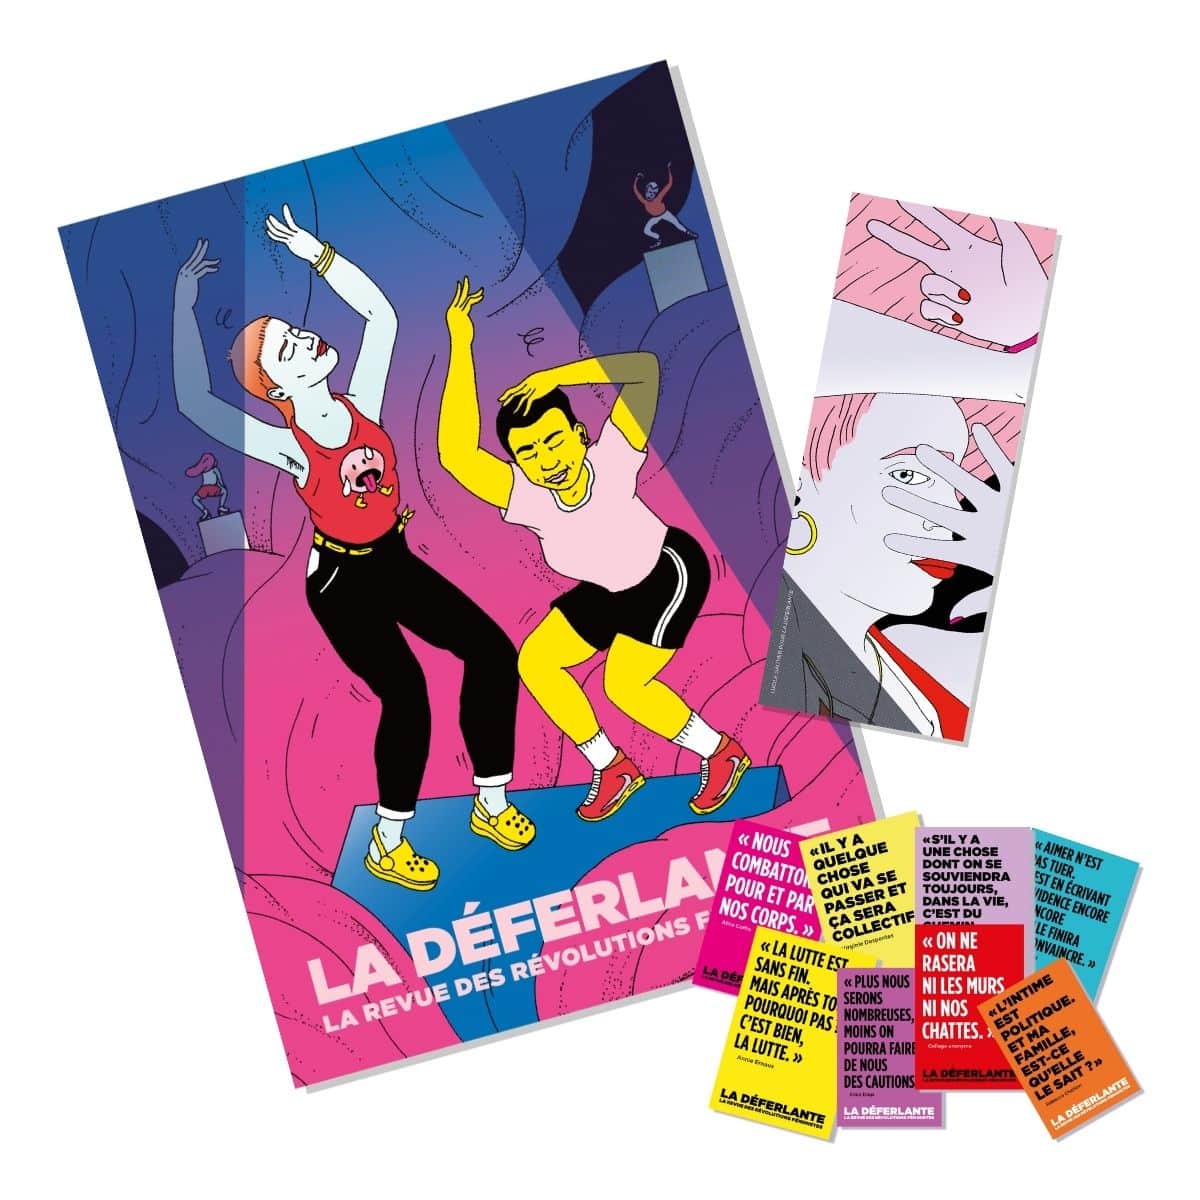 pack goodies Danser : affiche + marqye-page + stickers